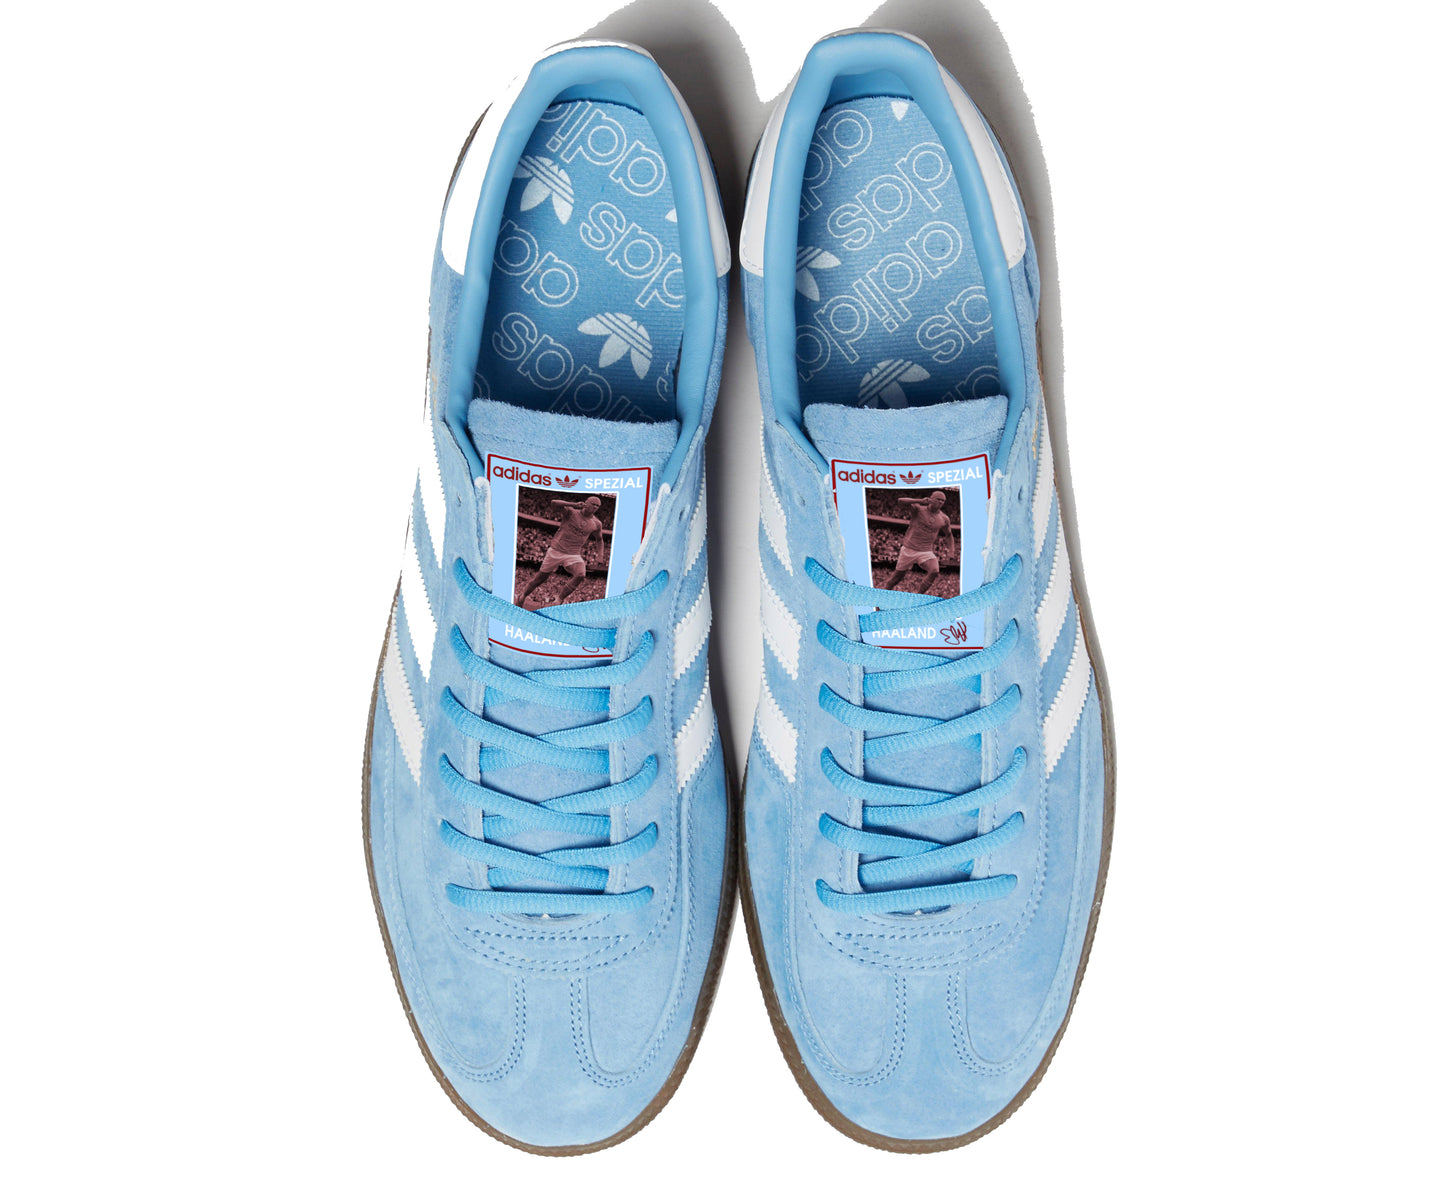 Limited edition Manchester City Erling Haaland inspired blue/ white / burgundy Adidas custom Handball Spezial trainers / sneakers